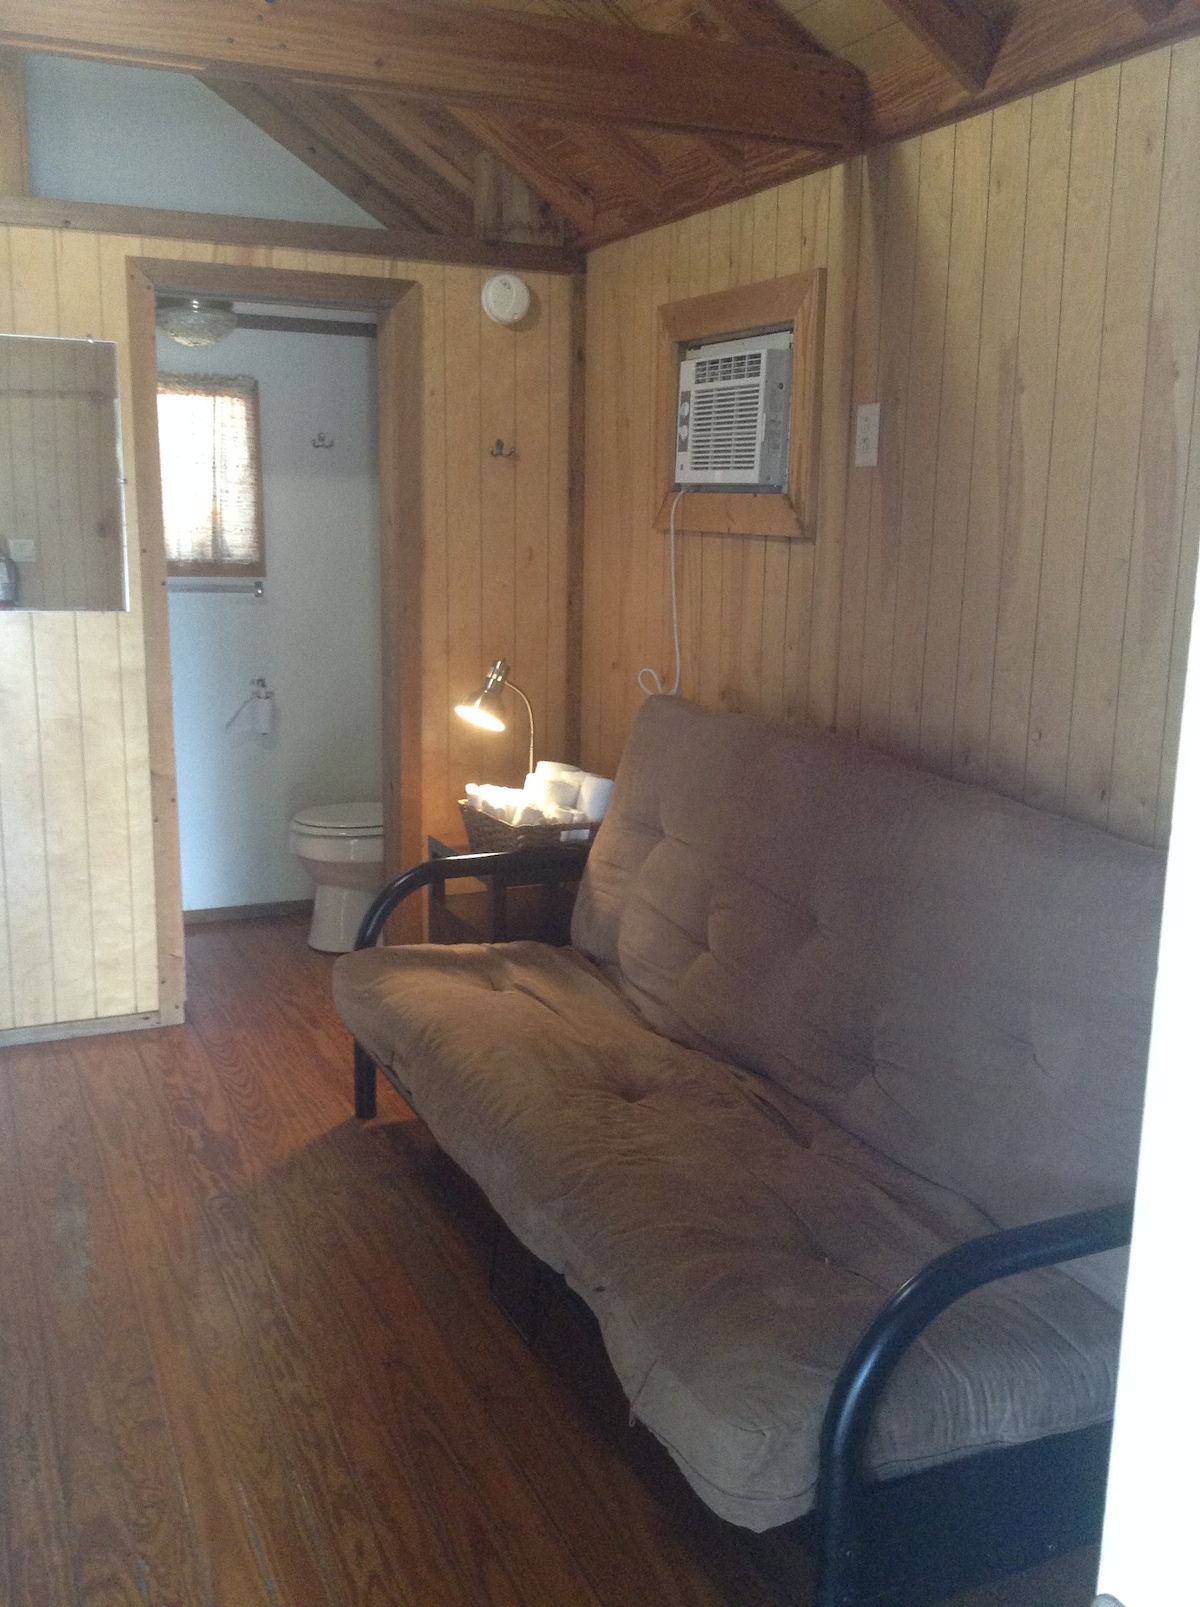 Deluxe comfy one room cabin with rustic charm